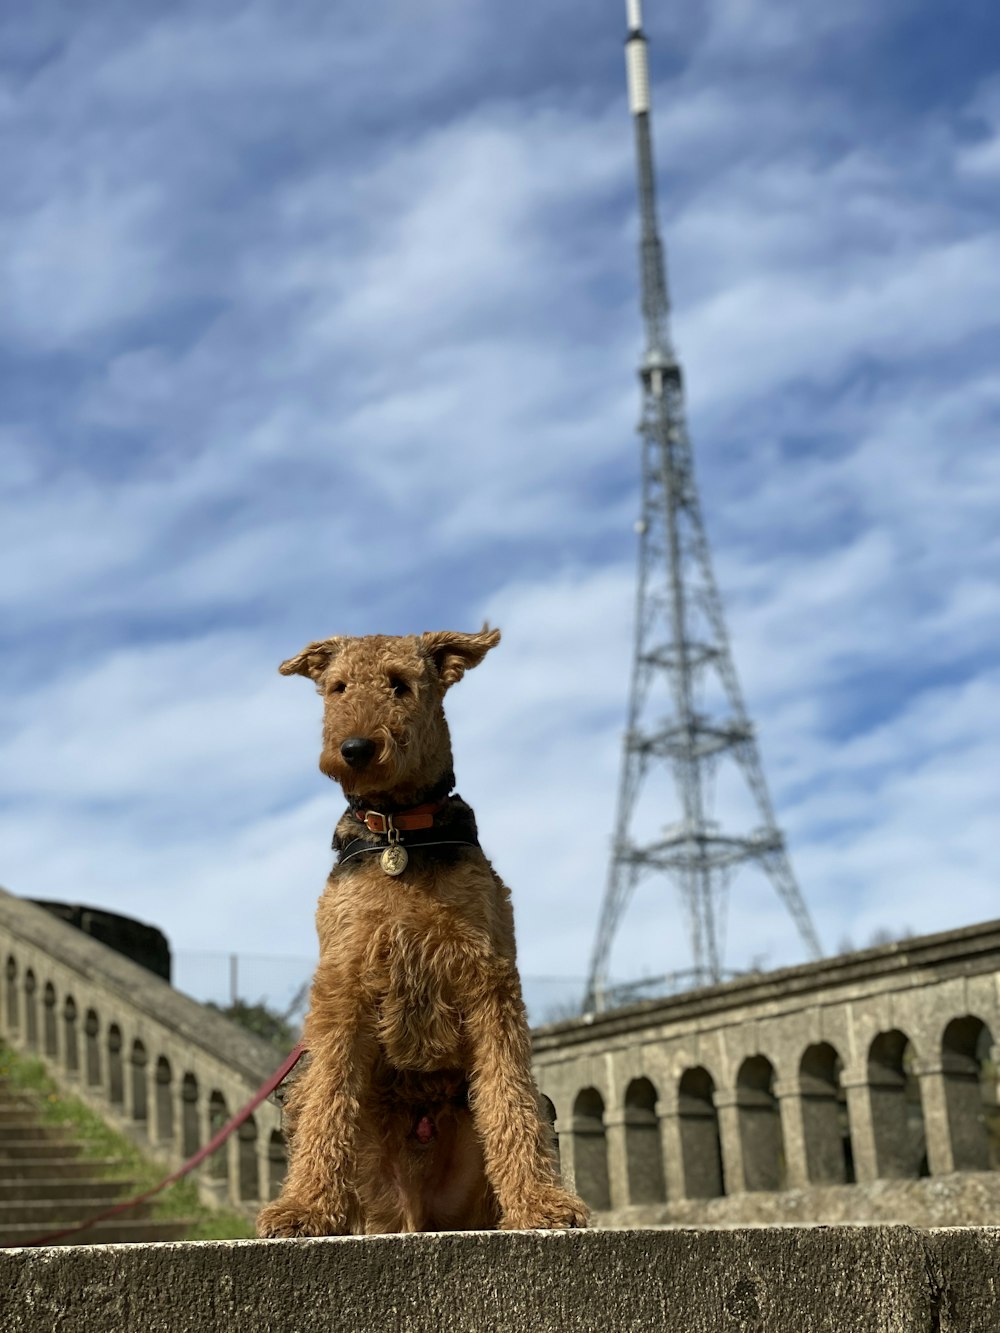 brown and black short coated dog on bridge under cloudy sky during daytime